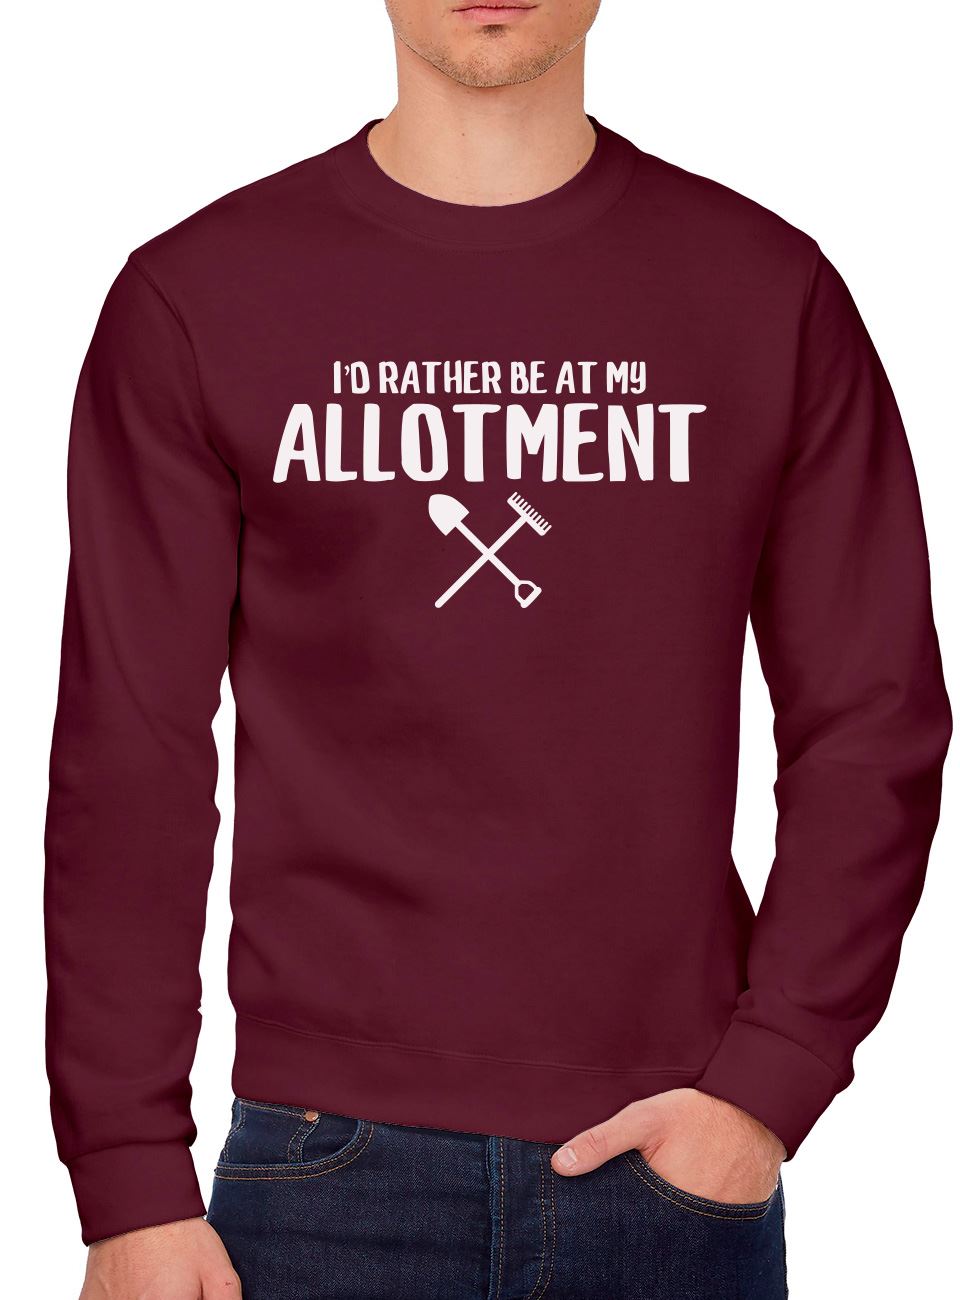 I'd Rather Be At My Allotment - Youth & Mens Sweatshirt